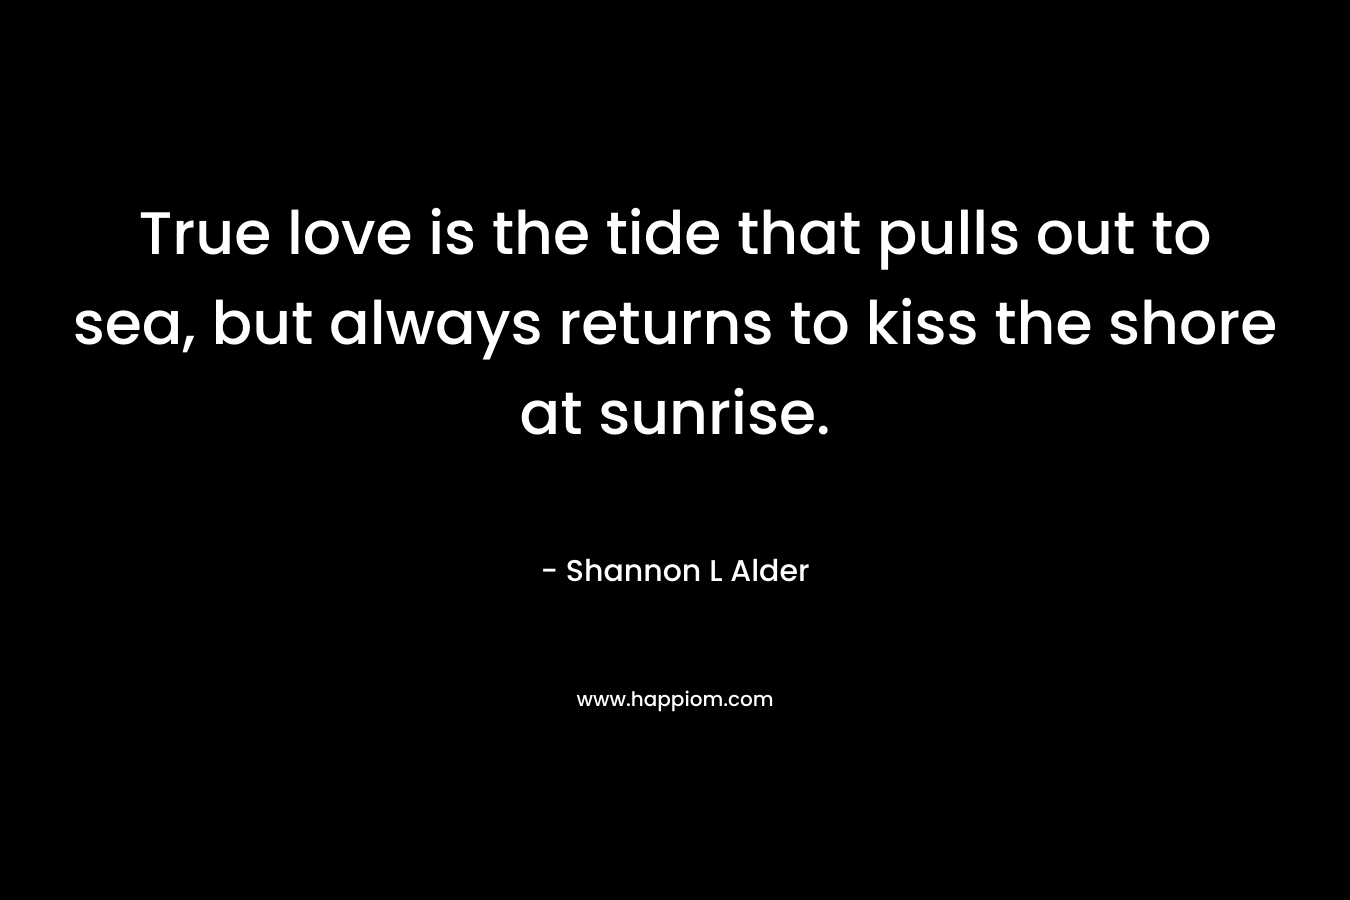 True love is the tide that pulls out to sea, but always returns to kiss the shore at sunrise. – Shannon L Alder